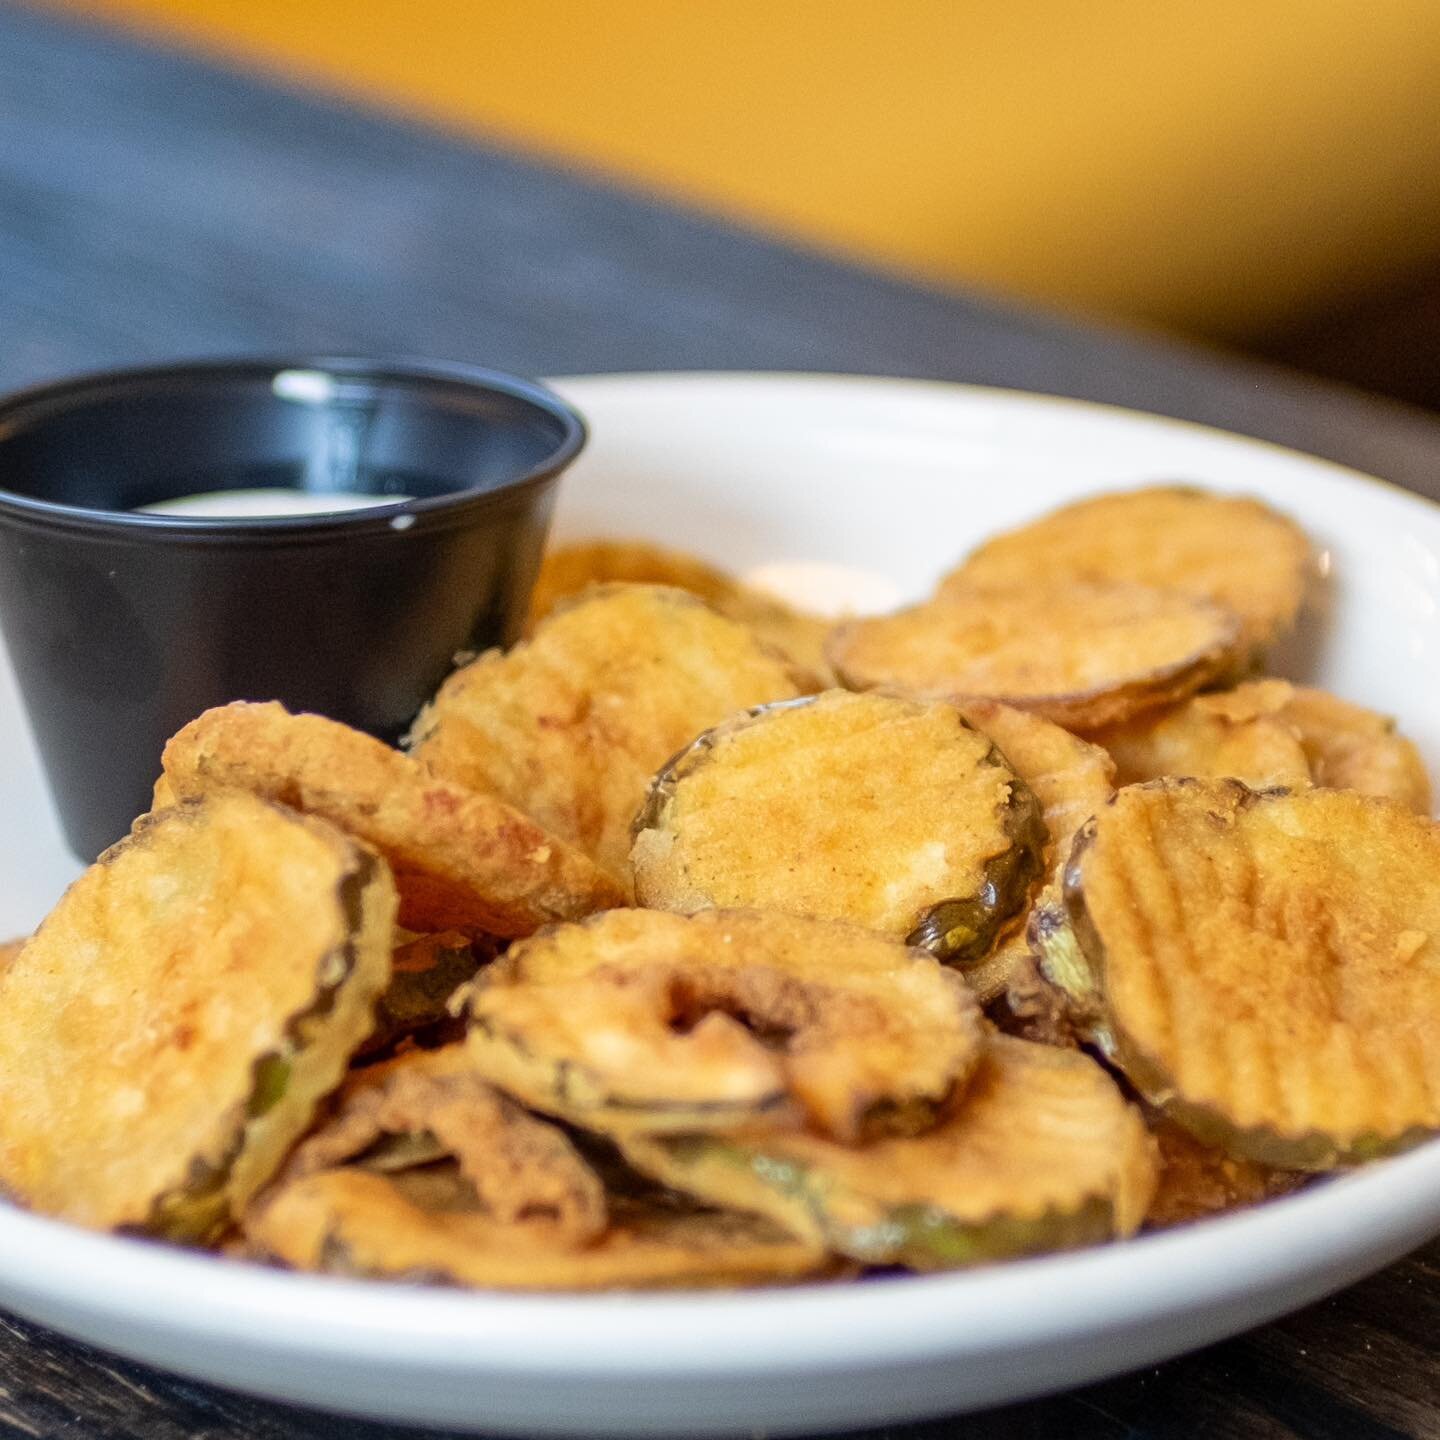 These fried pickles are your reminder that we&rsquo;re open until 9 on Sundays now!